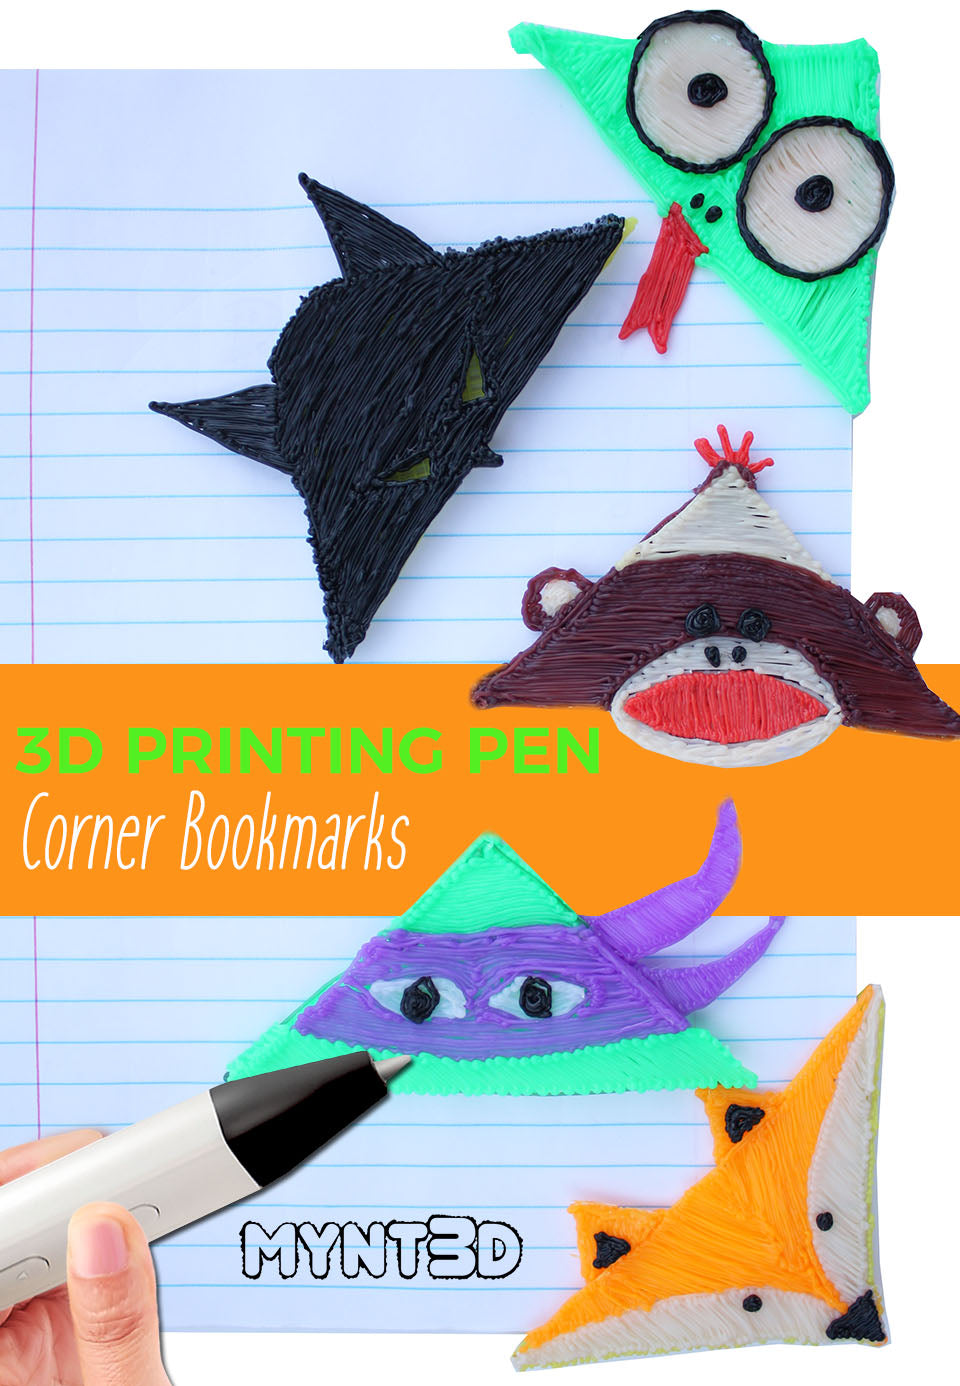 5 Corner Bookmark Designs to make with a 3D Pen